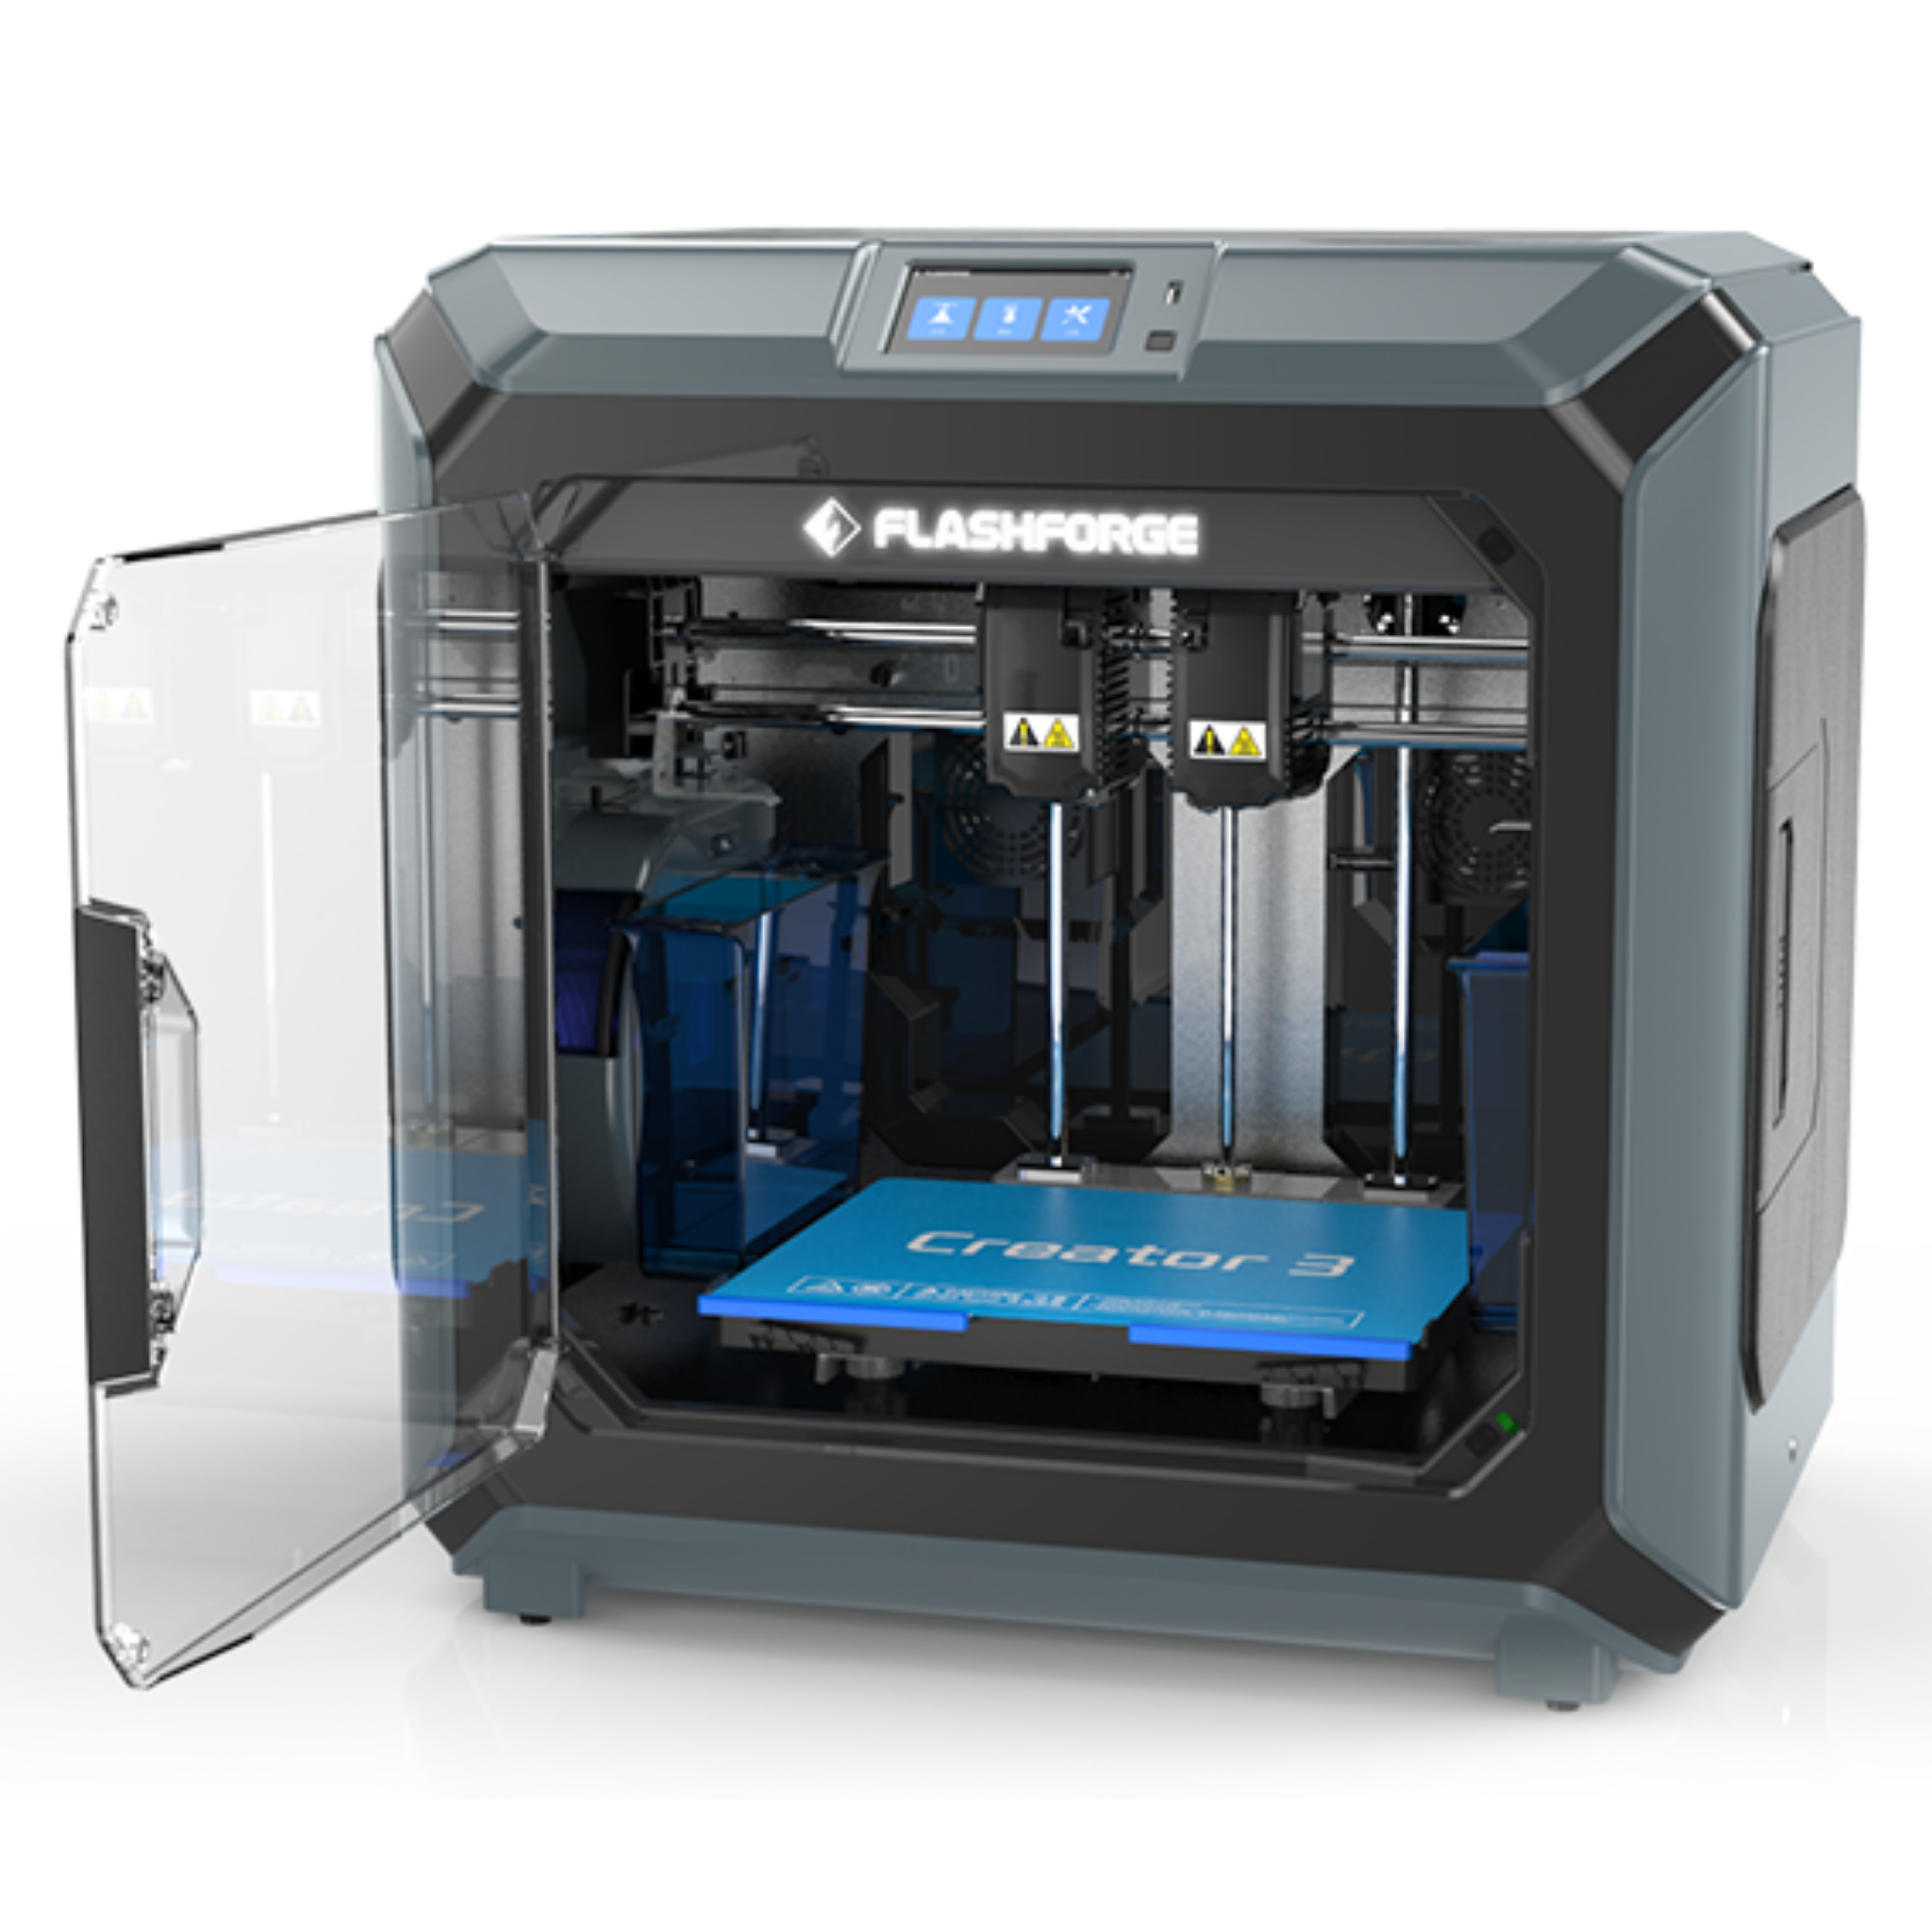 Flashforge Official Online Shop for 3D Printers, 3D Printing Filament and  More